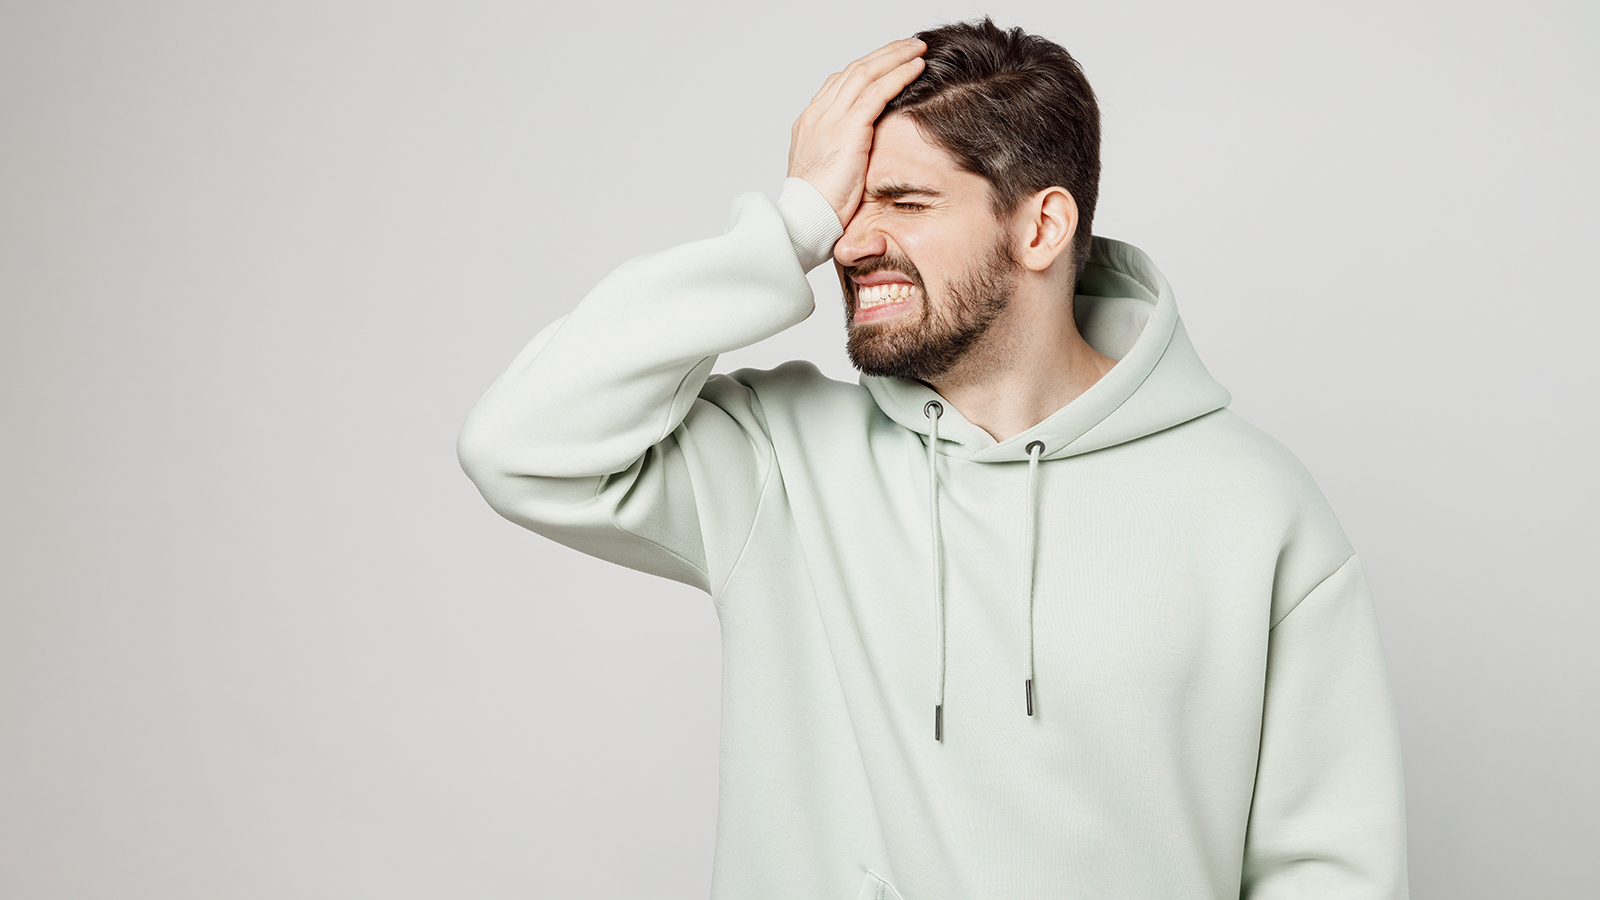 Young displeased sad unshaven caucasian man wear mint hoody put hand on face facepalm epic fail mistaken omg gesture isolated on plain solid white background studio portrait. People lifestyle concept